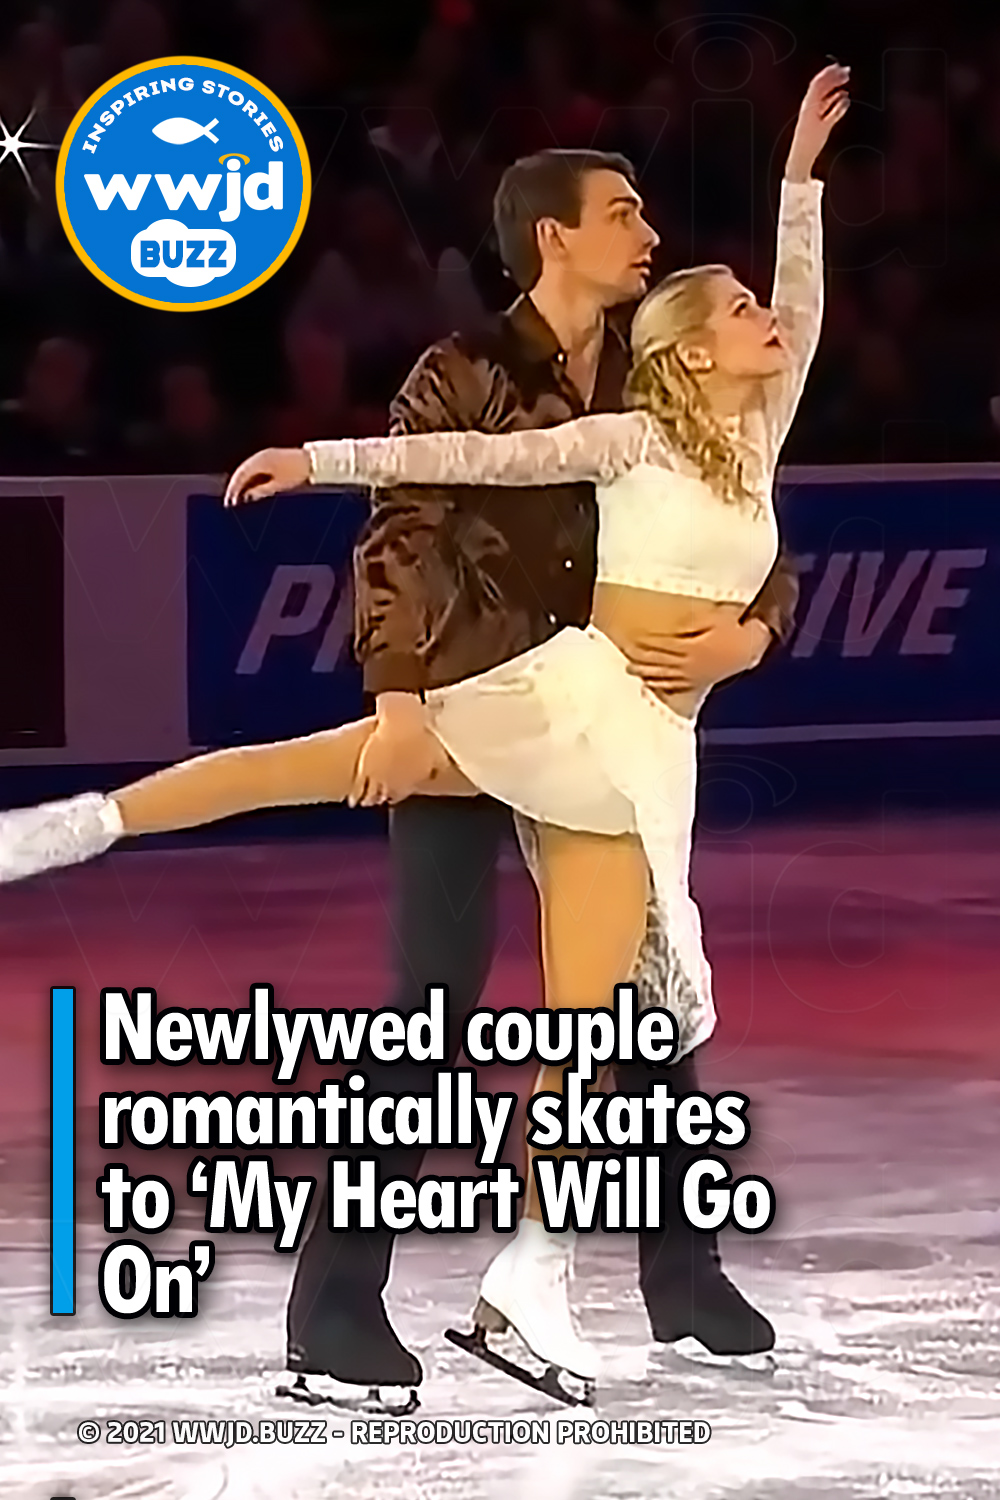 Newlywed couple romantically skates to ‘My Heart Will Go On’